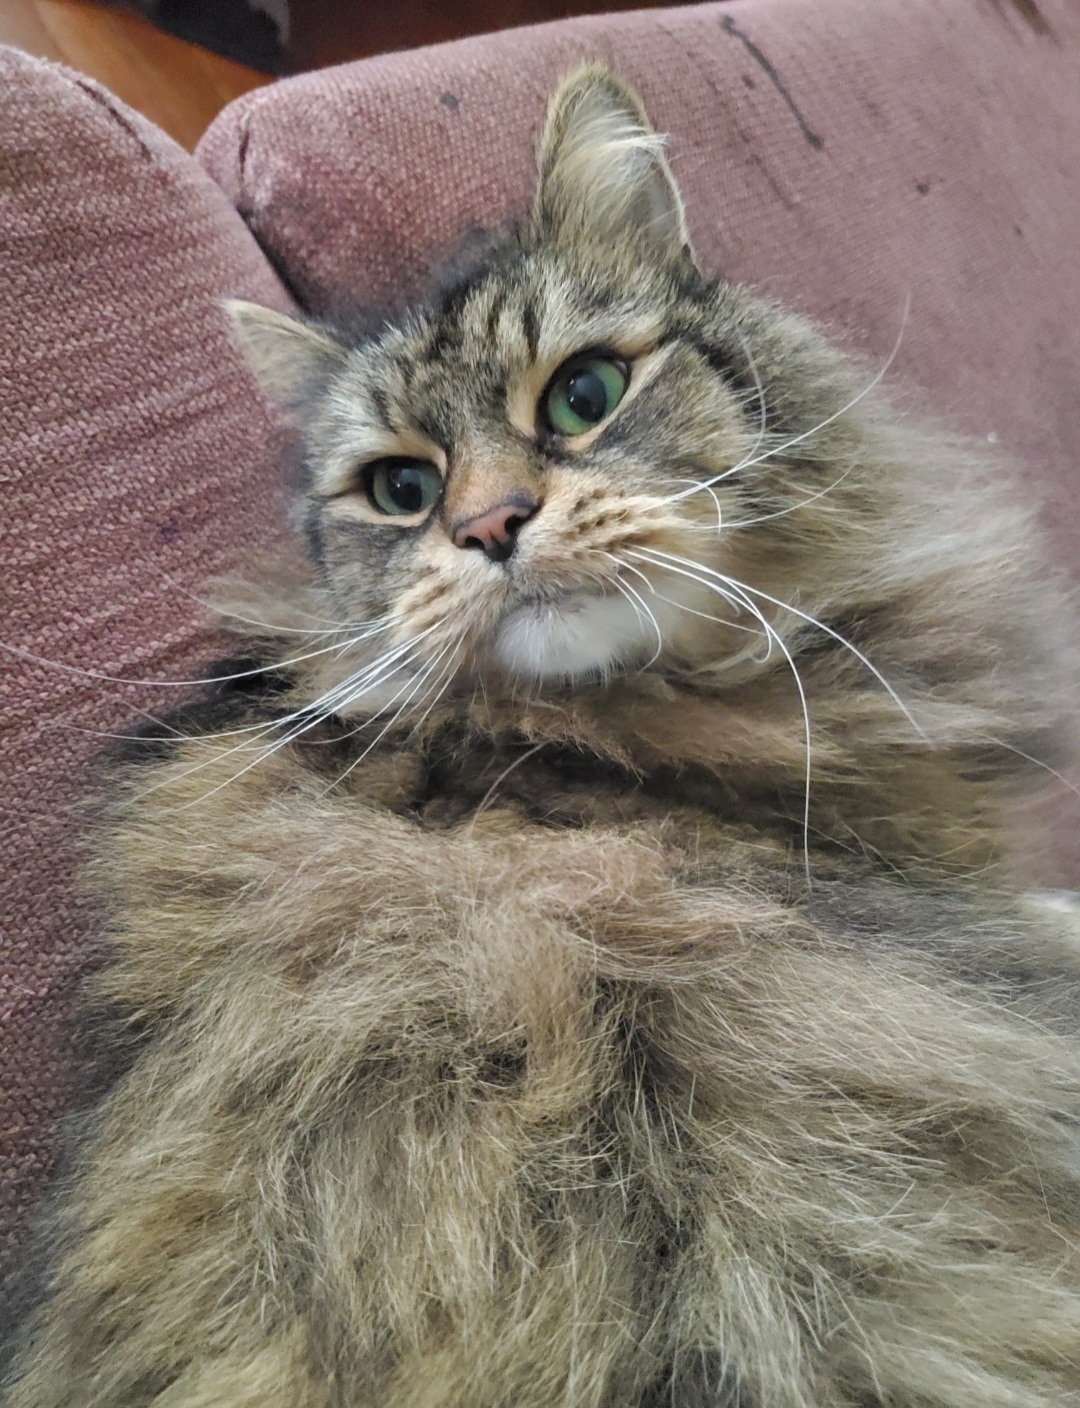 A long-haired gray and black tabby with green eyes on a burgundy couch